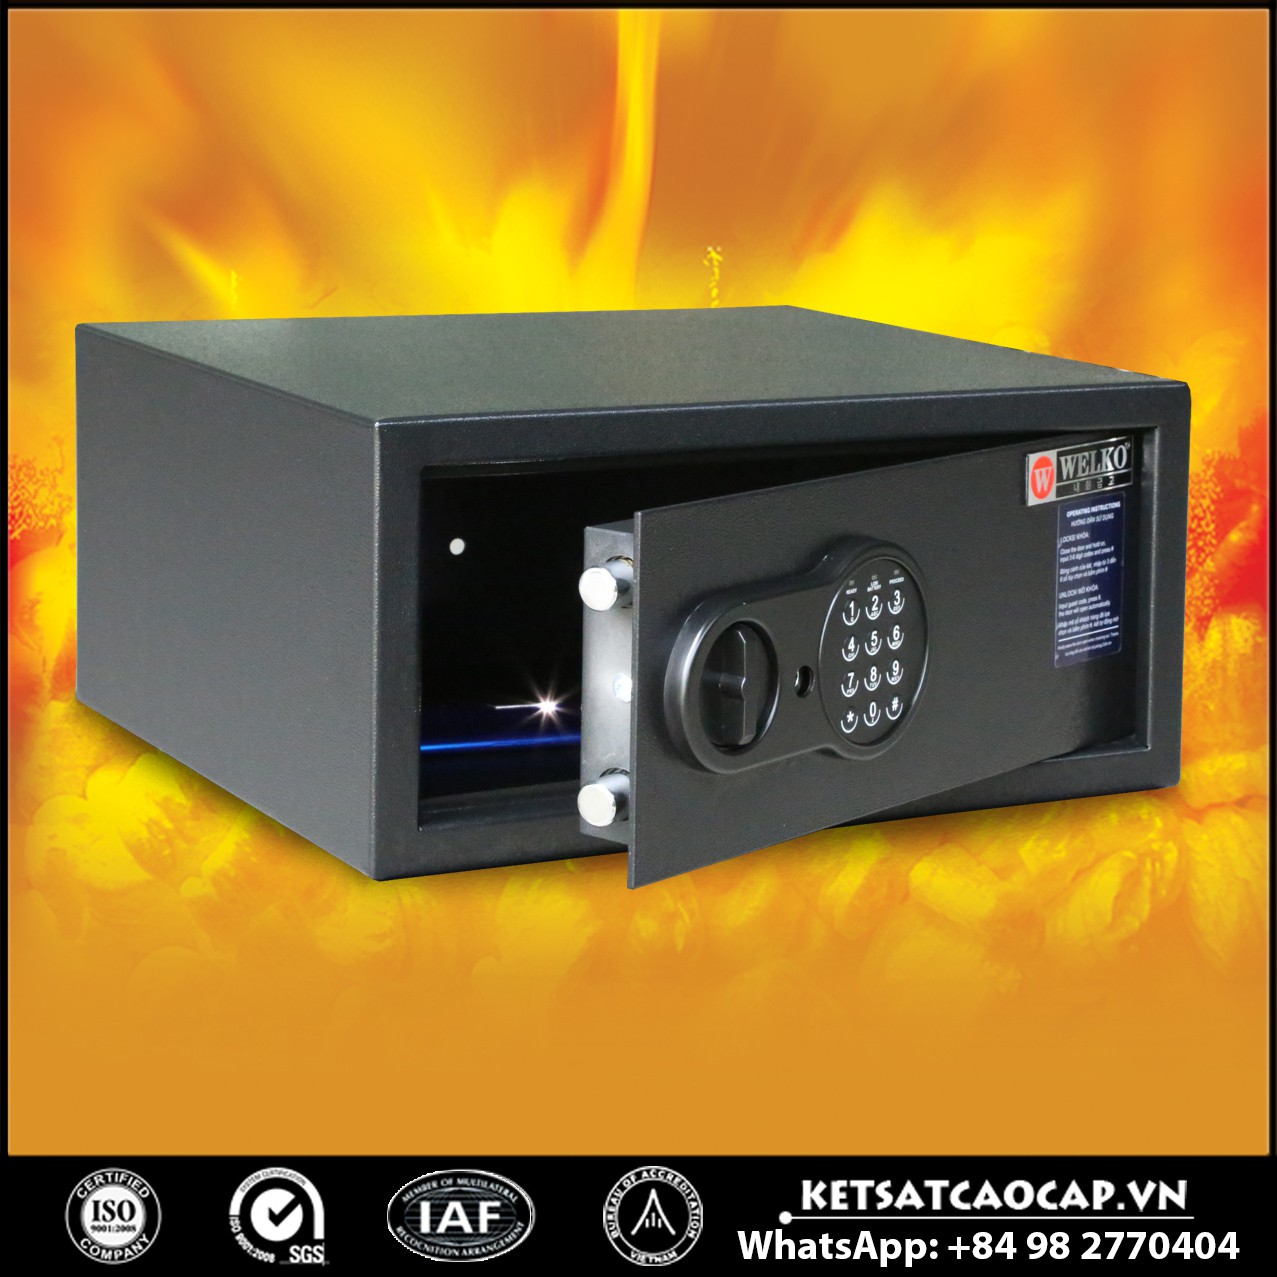 Hotel Safes - Manufacturers & Suppliers